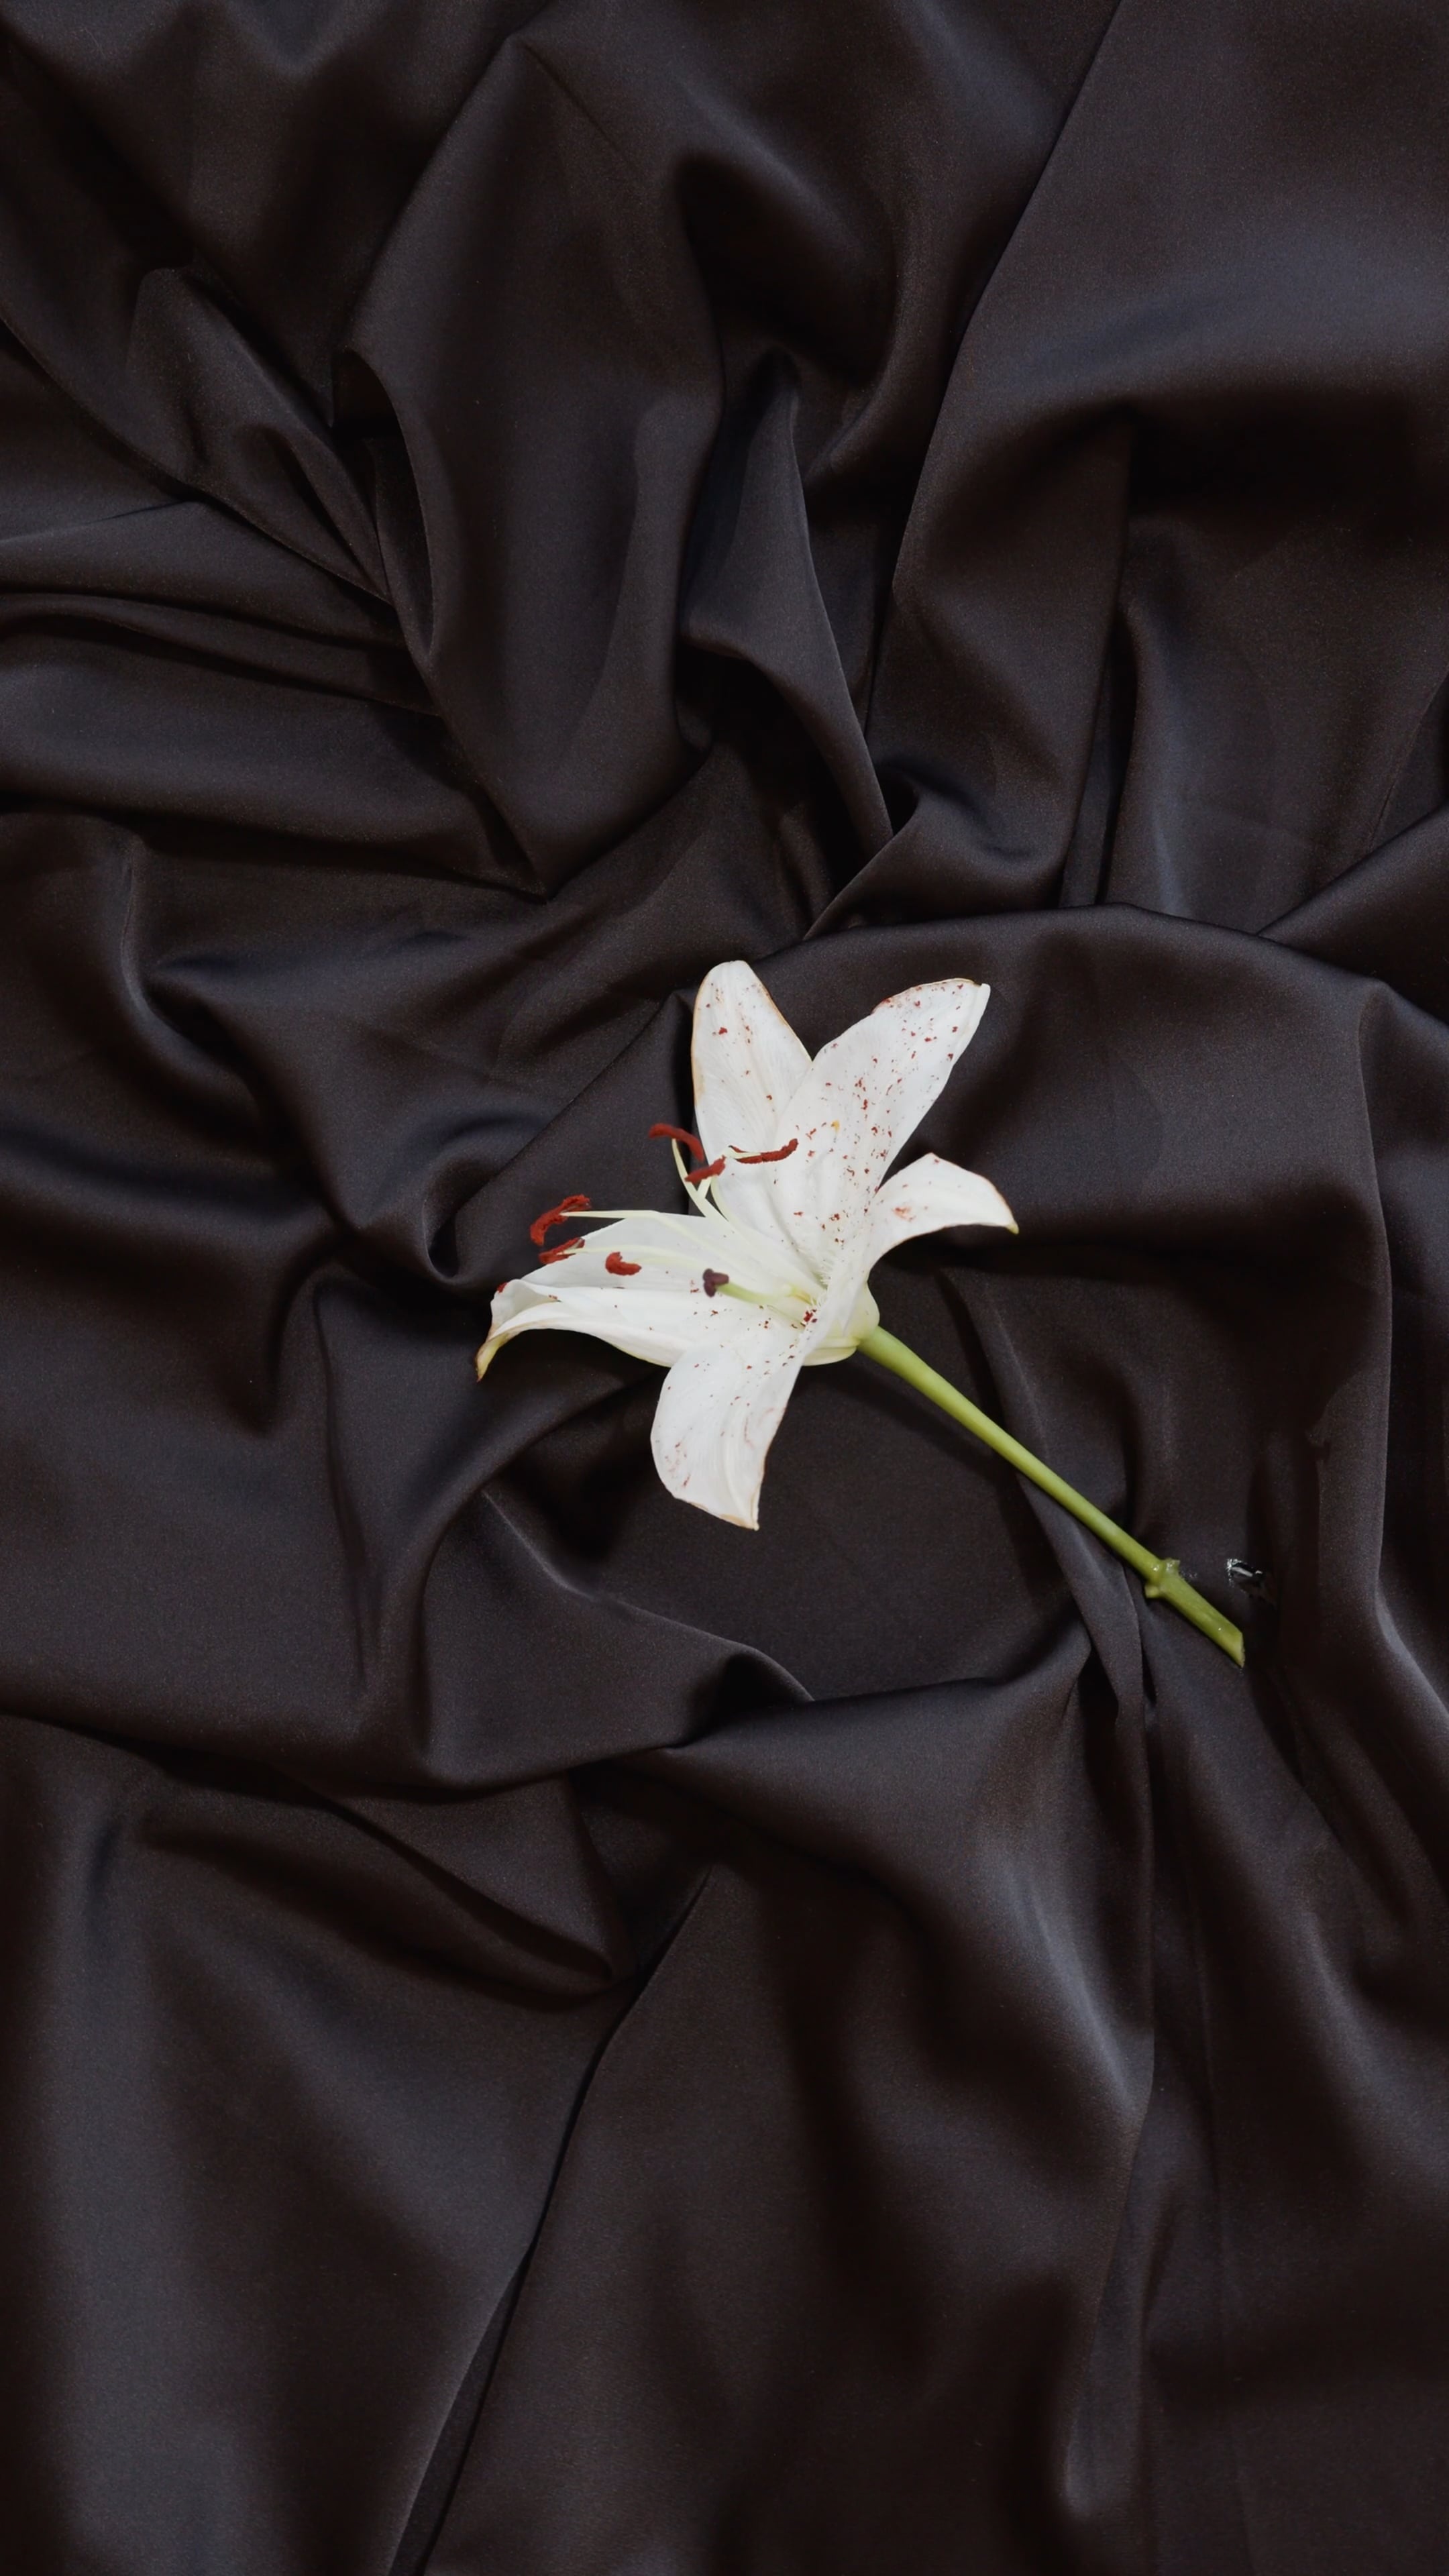 Flower on black fabric, Contrast and beauty, Dramatic background, Captivating imagery, 2160x3840 4K Phone